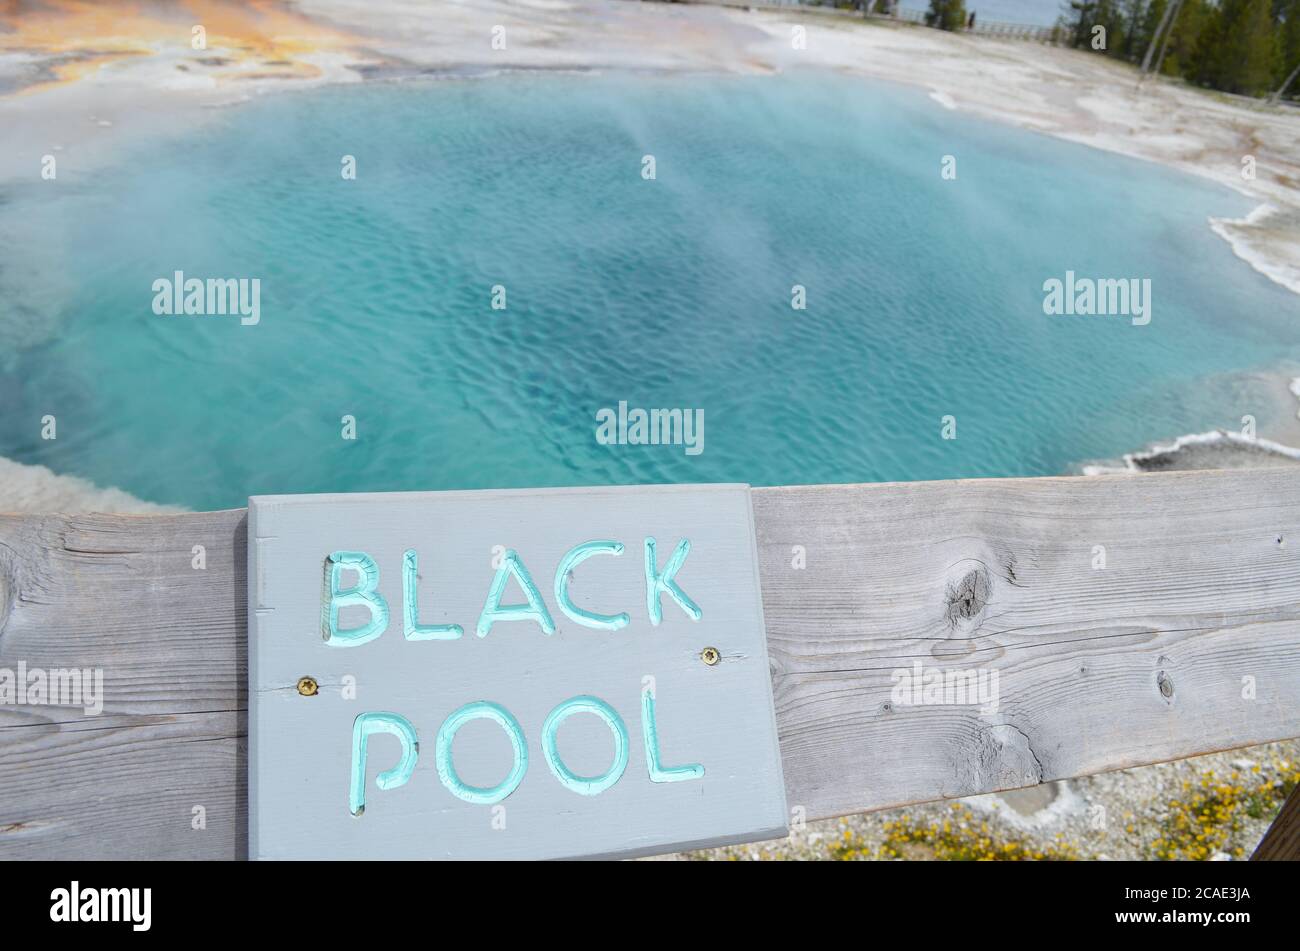 YELLOWSTONE NATIONAL PARK, WYOMING - JUNE 8, 2017: Black Pool Hot Spring in West Thumb Geyser Basin on the Shore of Yellowstone Lake Stock Photo